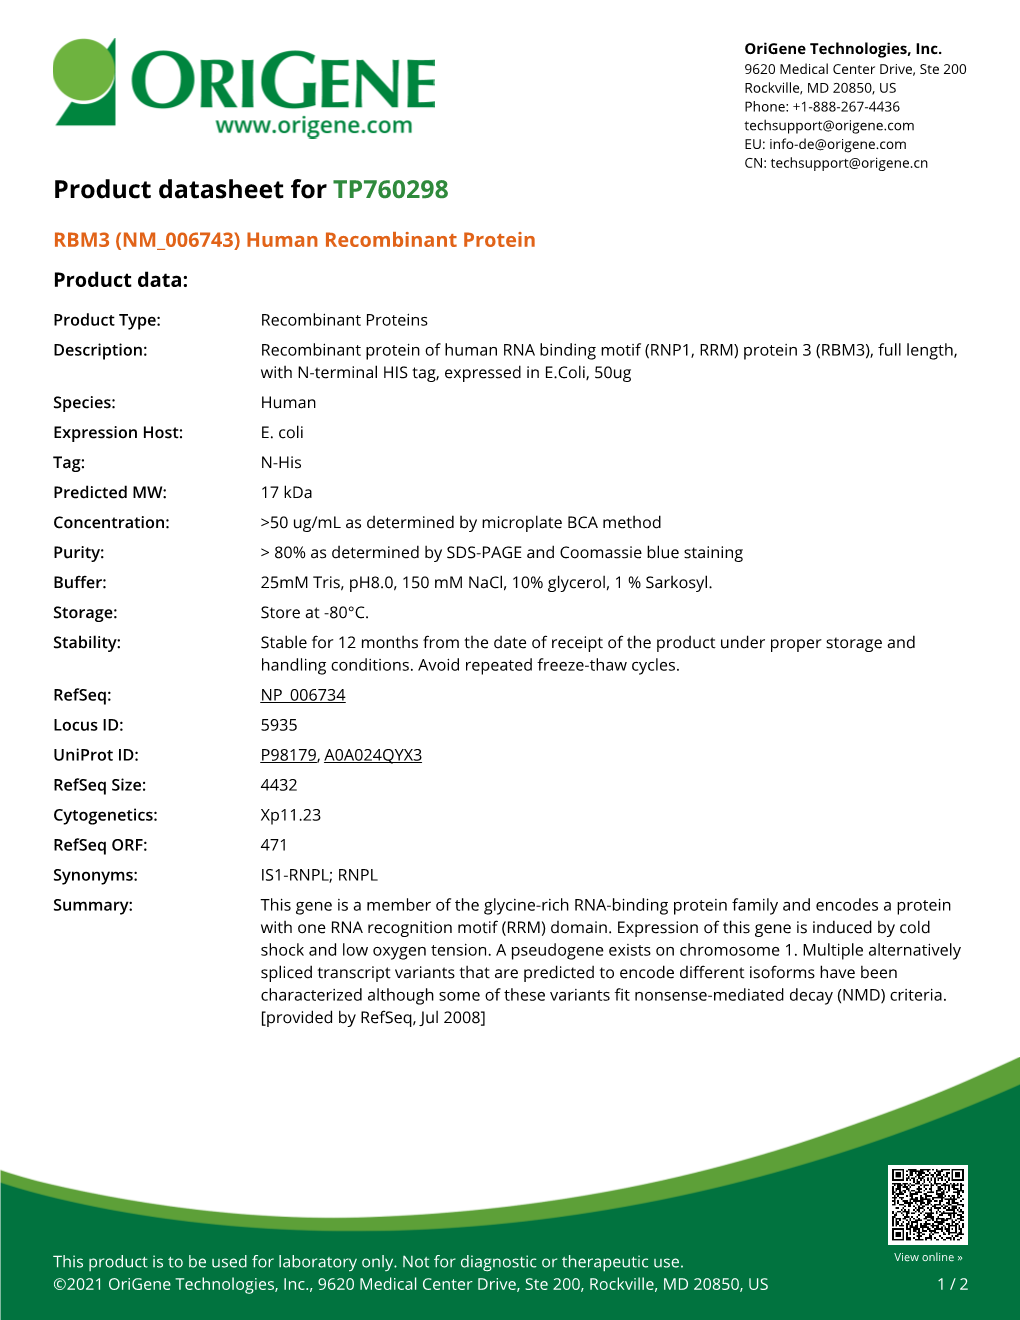 RBM3 (NM 006743) Human Recombinant Protein Product Data